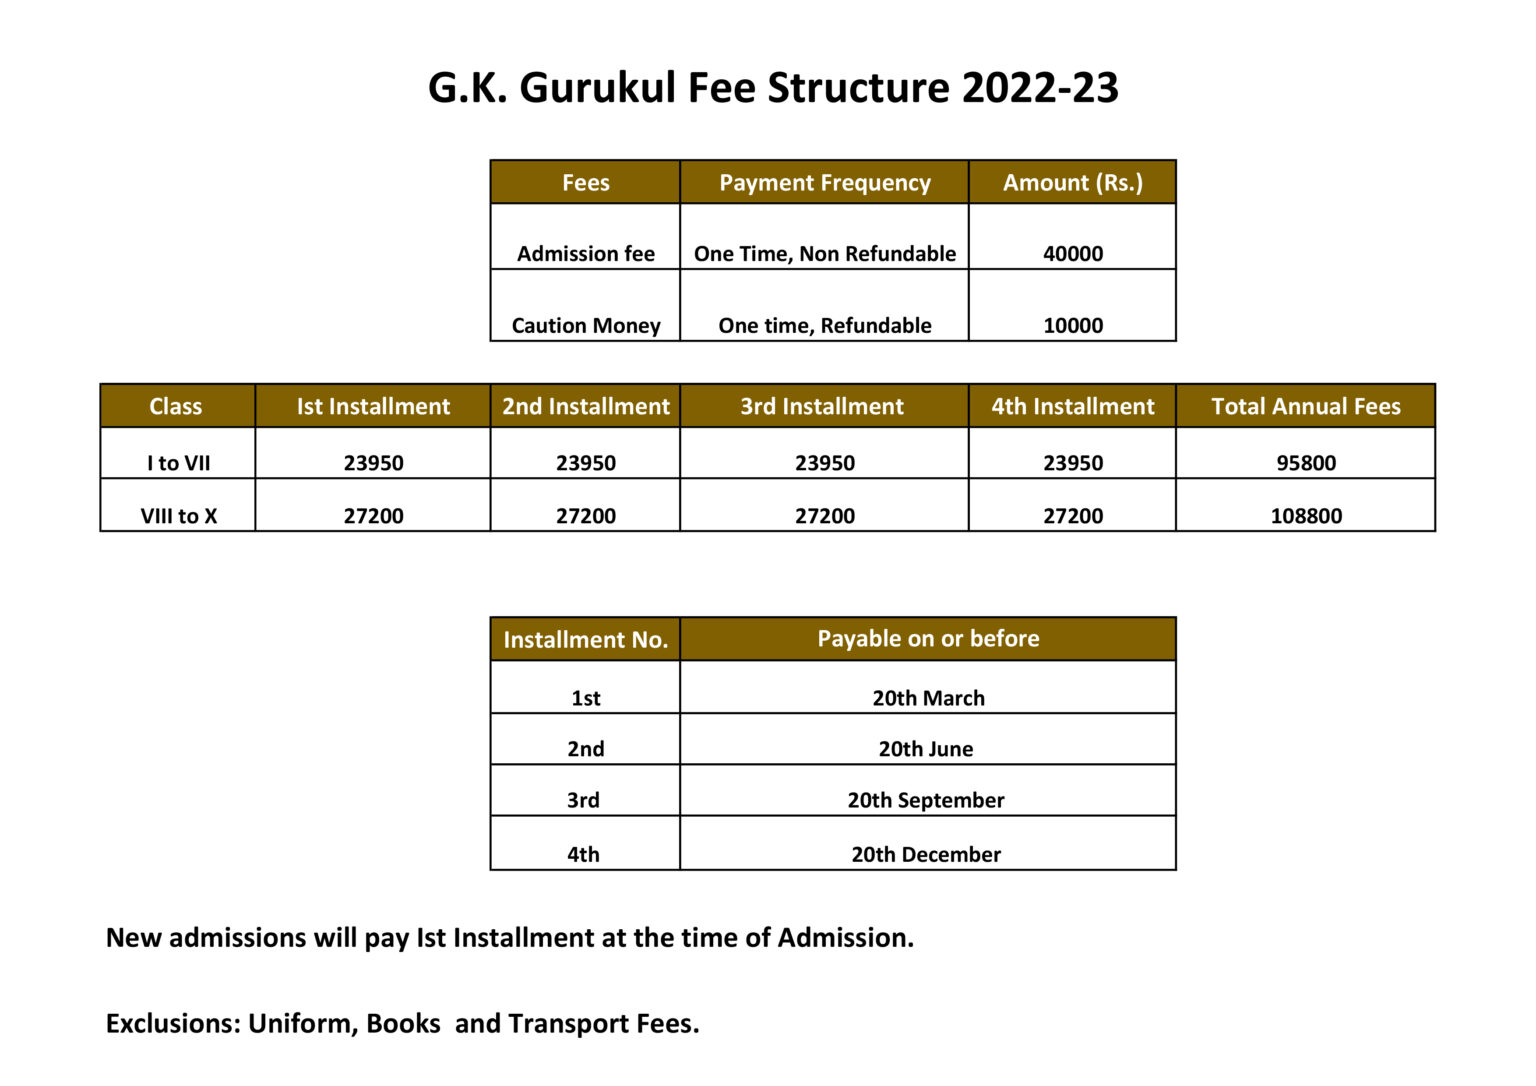 Fee Structure GKG 2022 23 1536x1086 